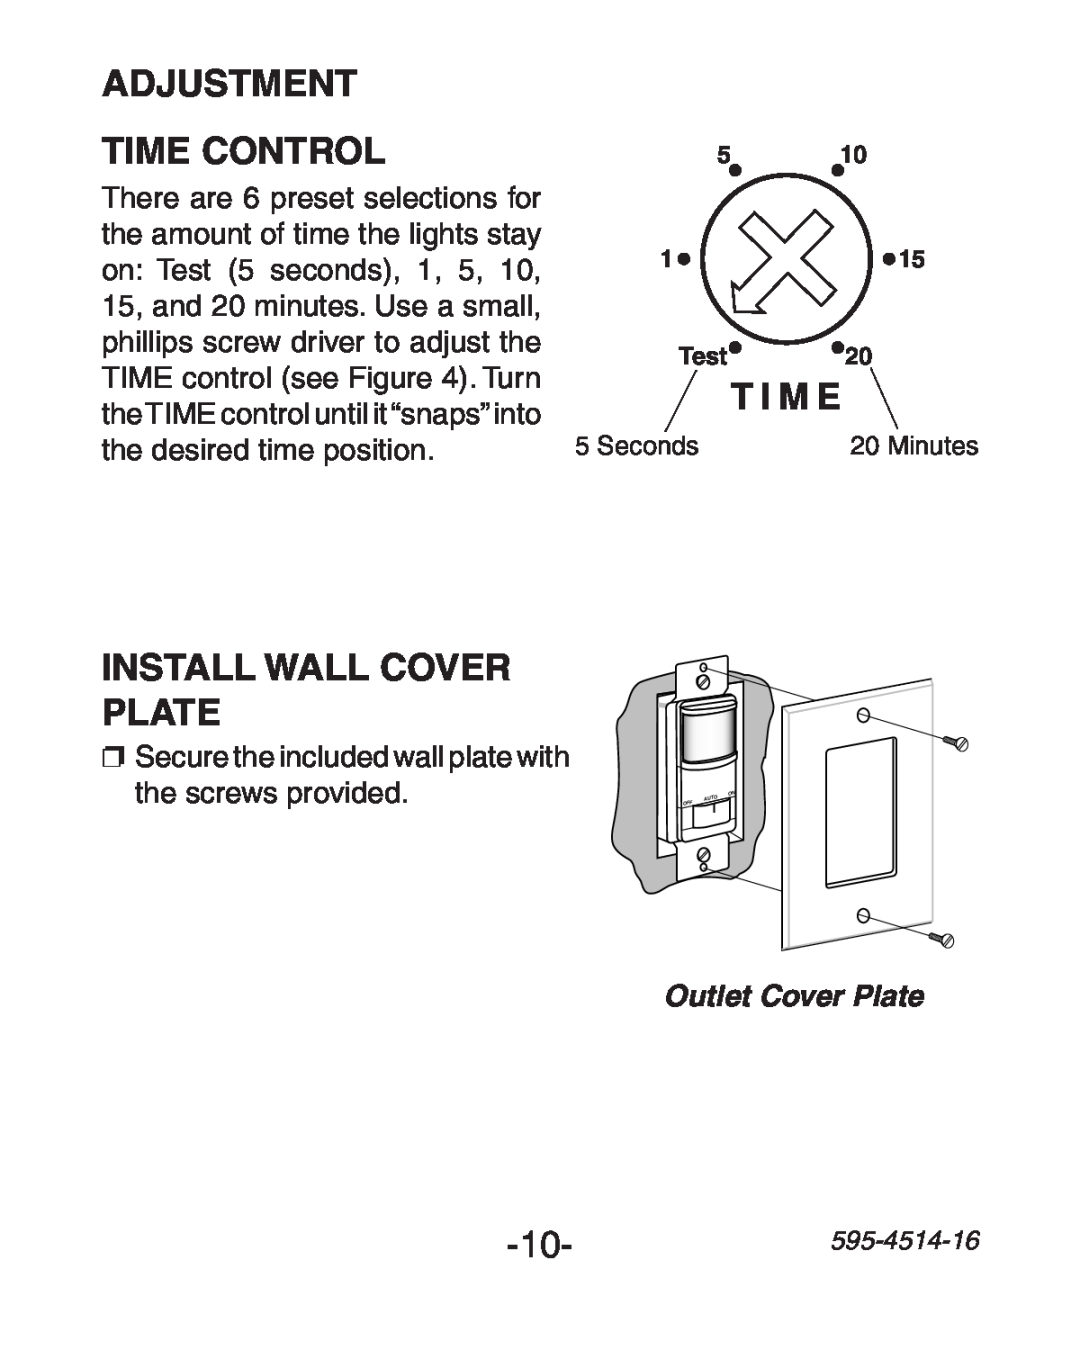 Heath Zenith 6107 manual ADJUSTMENT Time Control, T I M E, Install Wall Cover Plate, Outlet Cover Plate, 5 115 Test20 